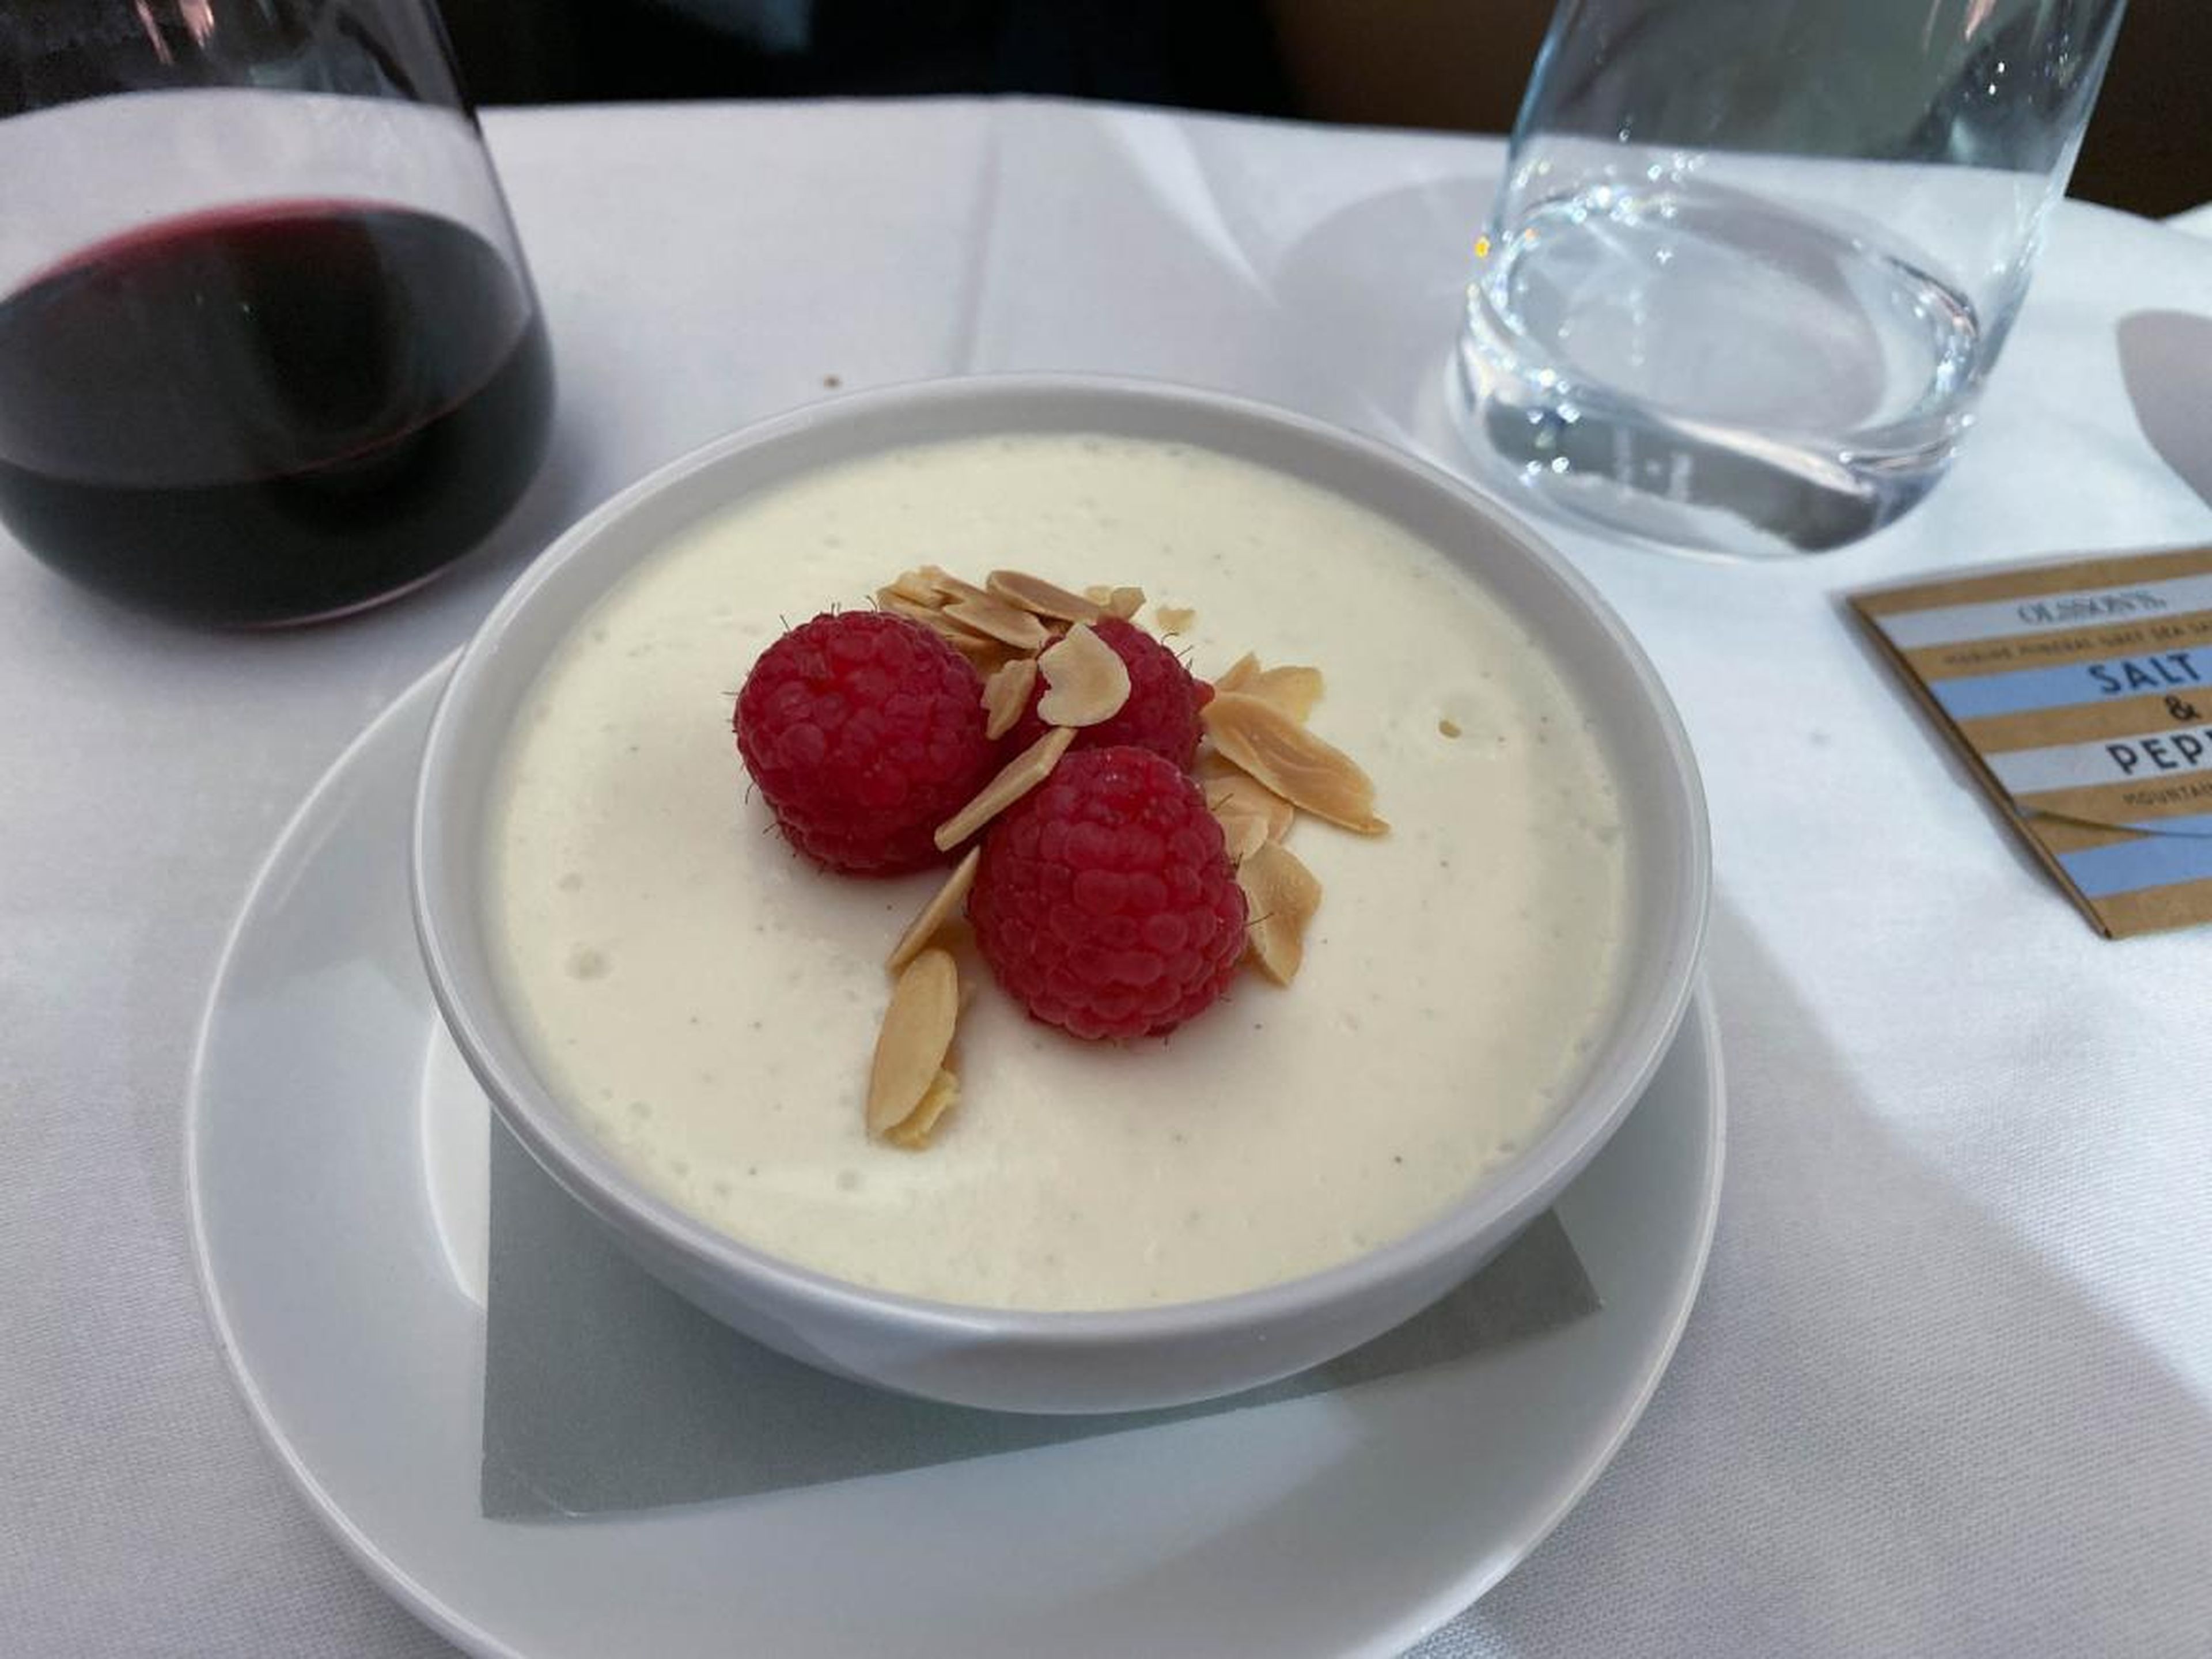 But the dessert, panna cotta trifle with raspberries and toasted almonds, was the star. I devoured it.